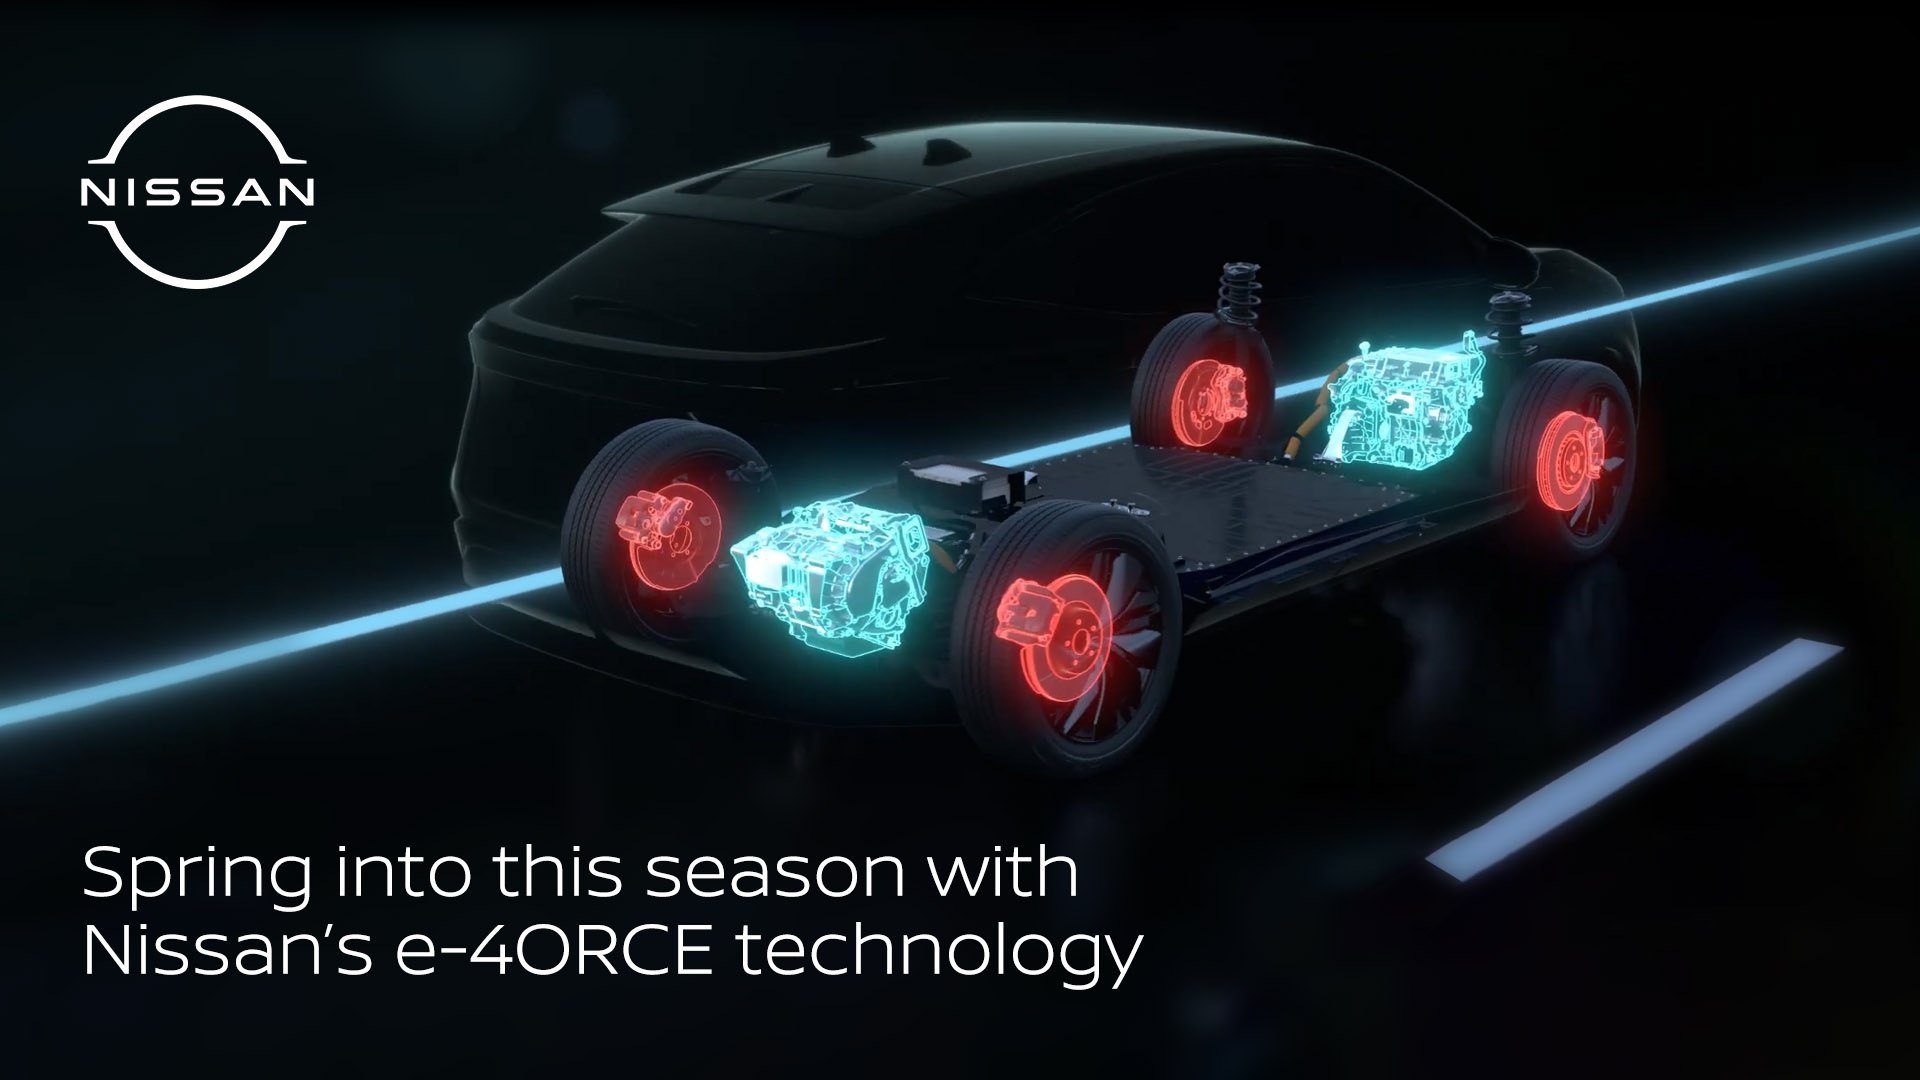 Nissan's e-4ORCE Springs into this Season with a Lightning-Fast Response of 0.0001 Seconds